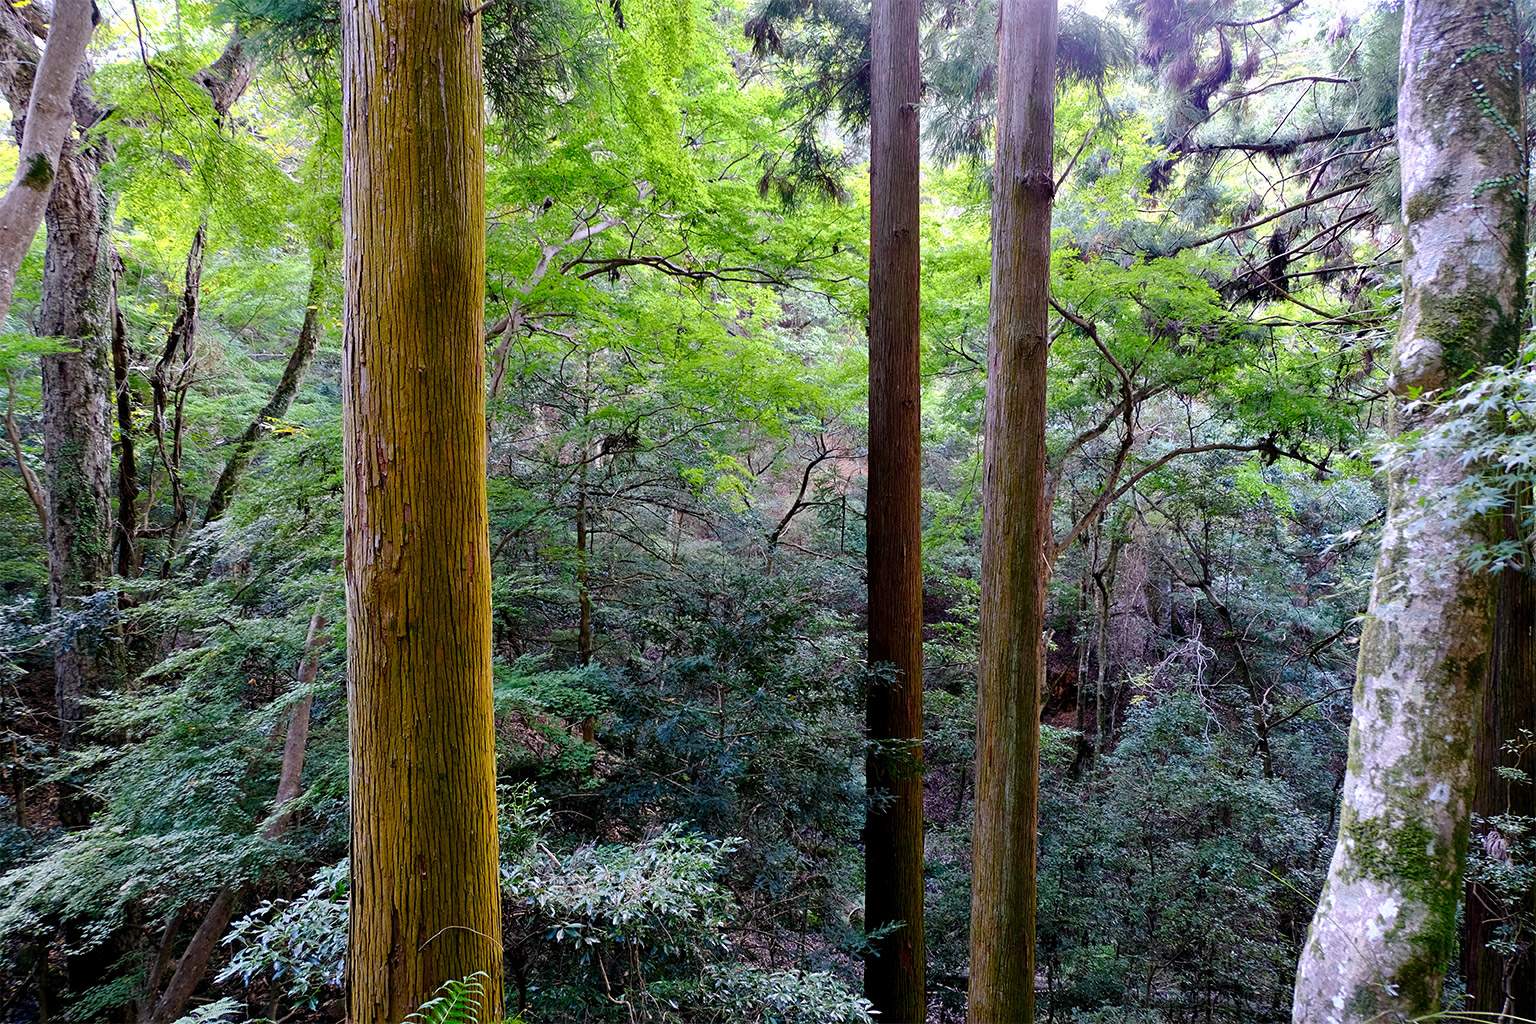 Conifers grow tall and straight.